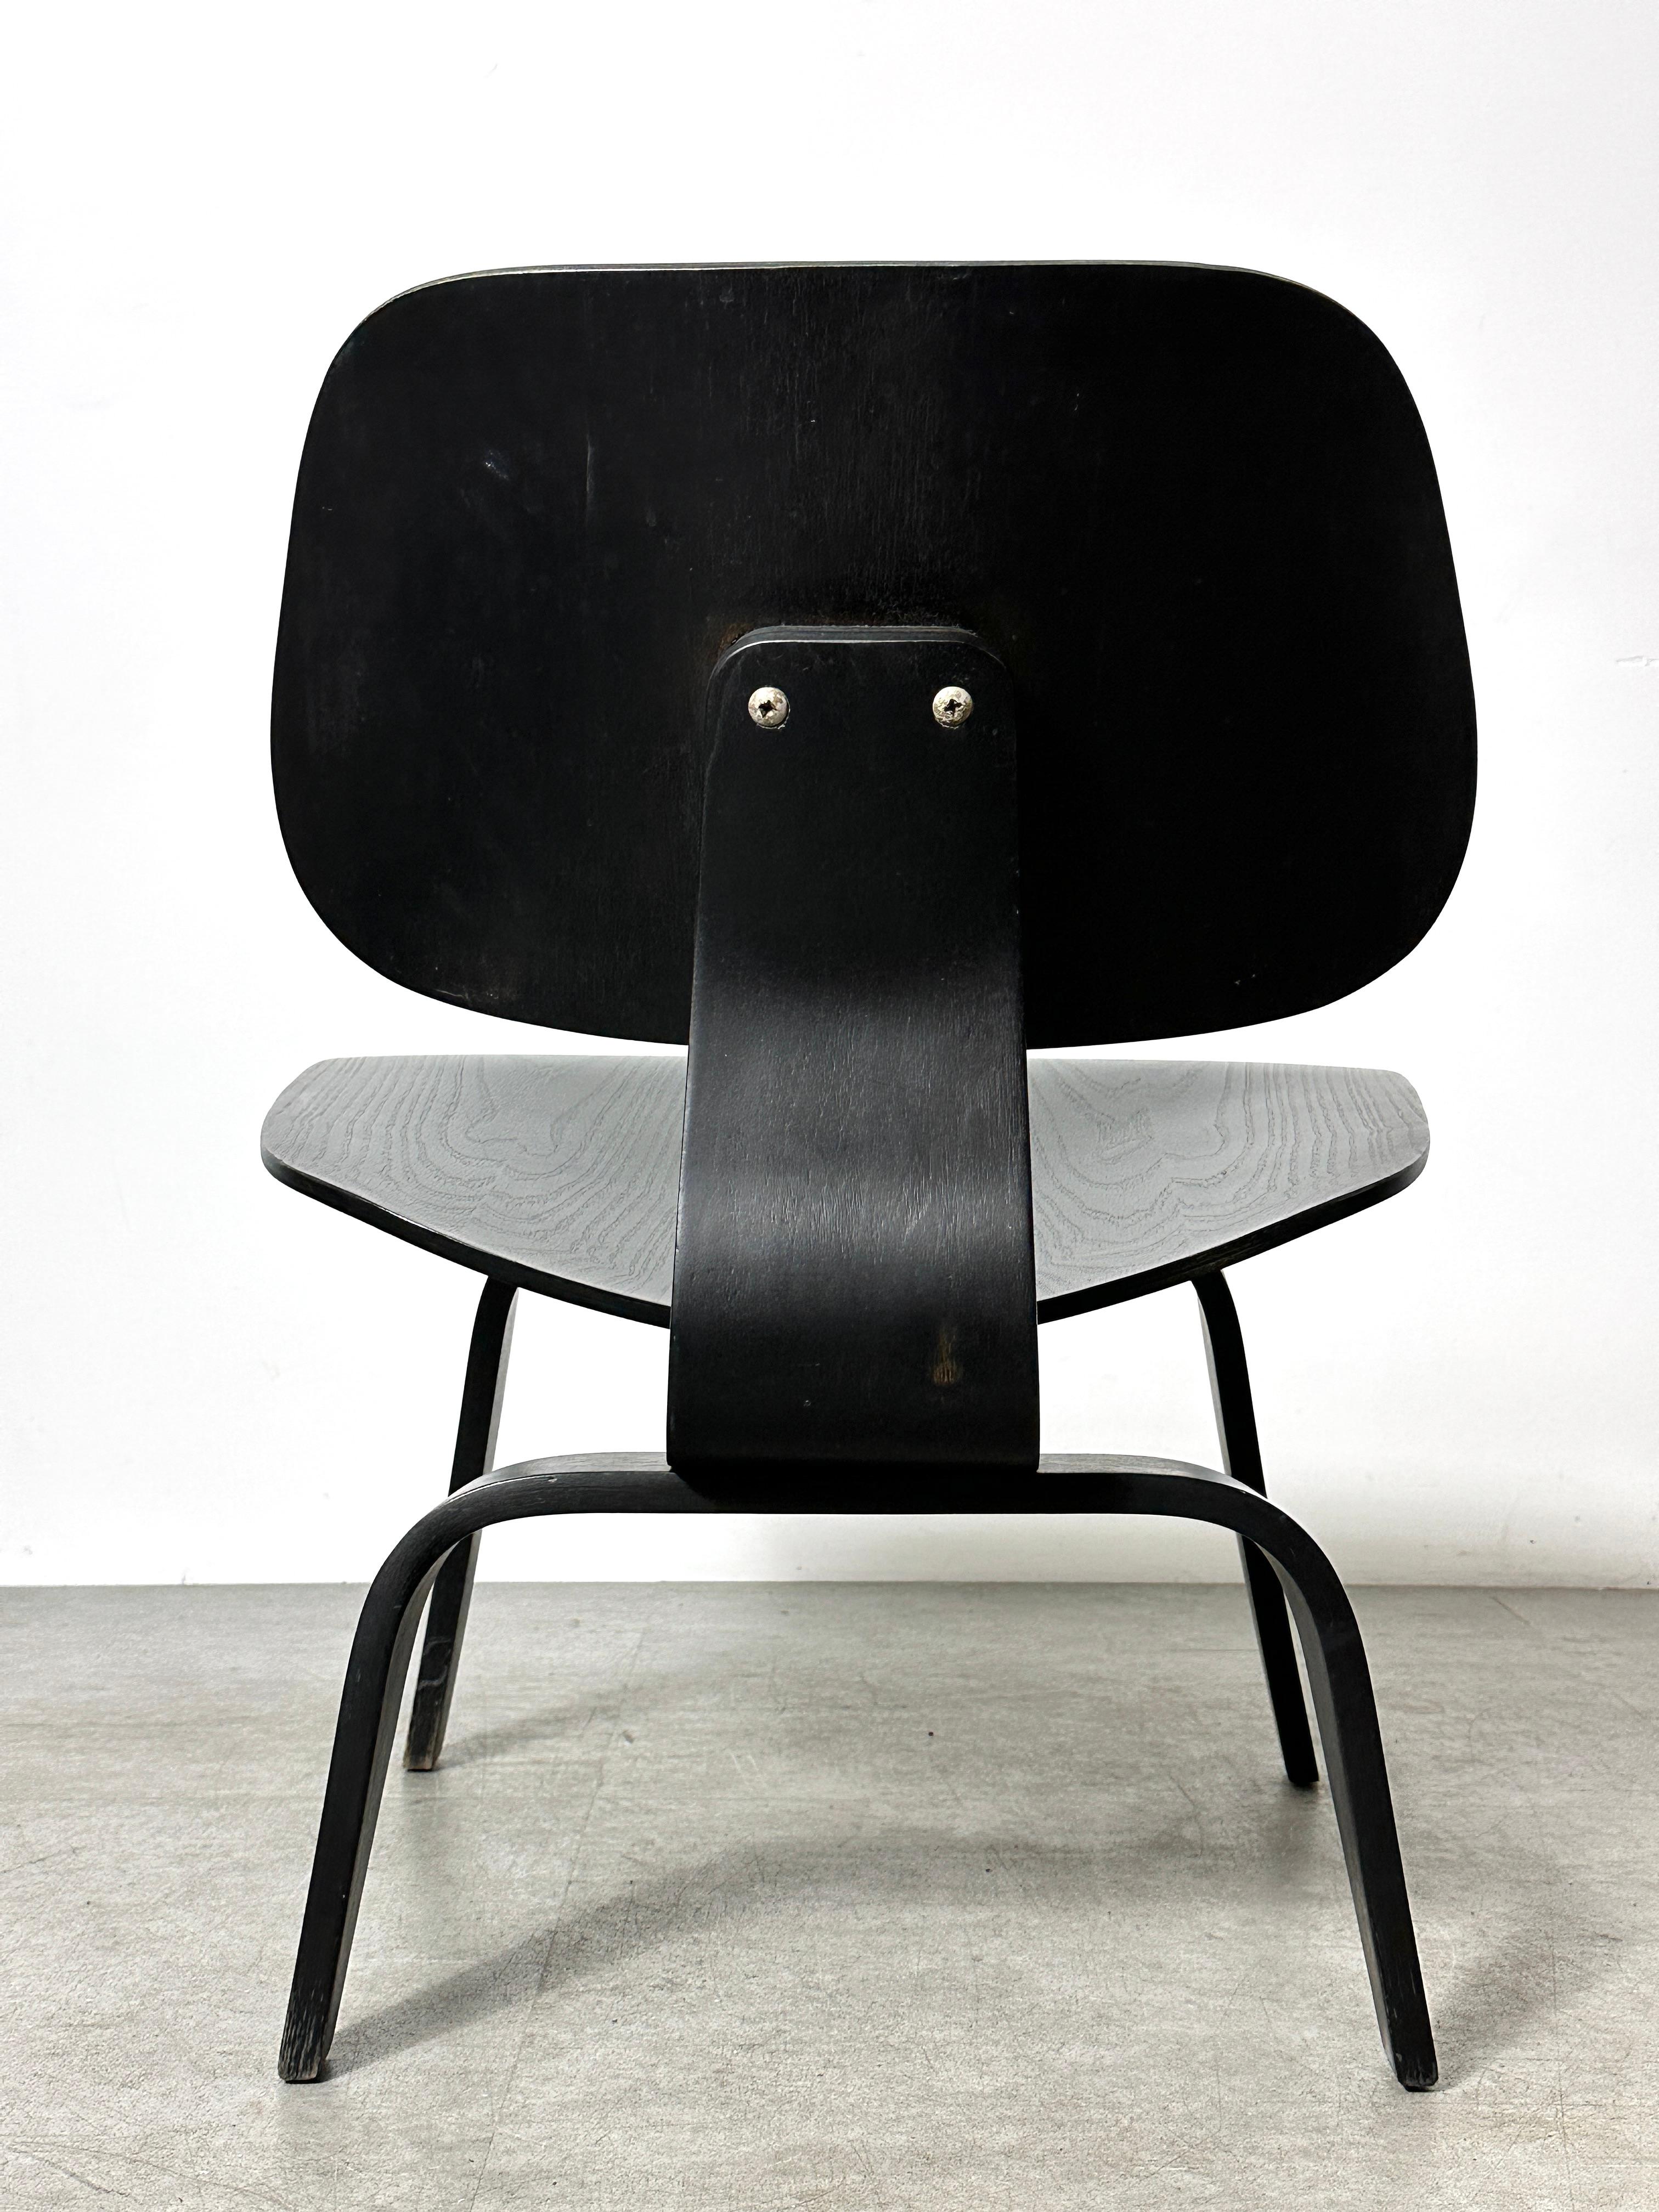 Mid-20th Century Vintage 1st Generation Black LCW Lounge Chair by Charles Eames for Evans 1940s For Sale